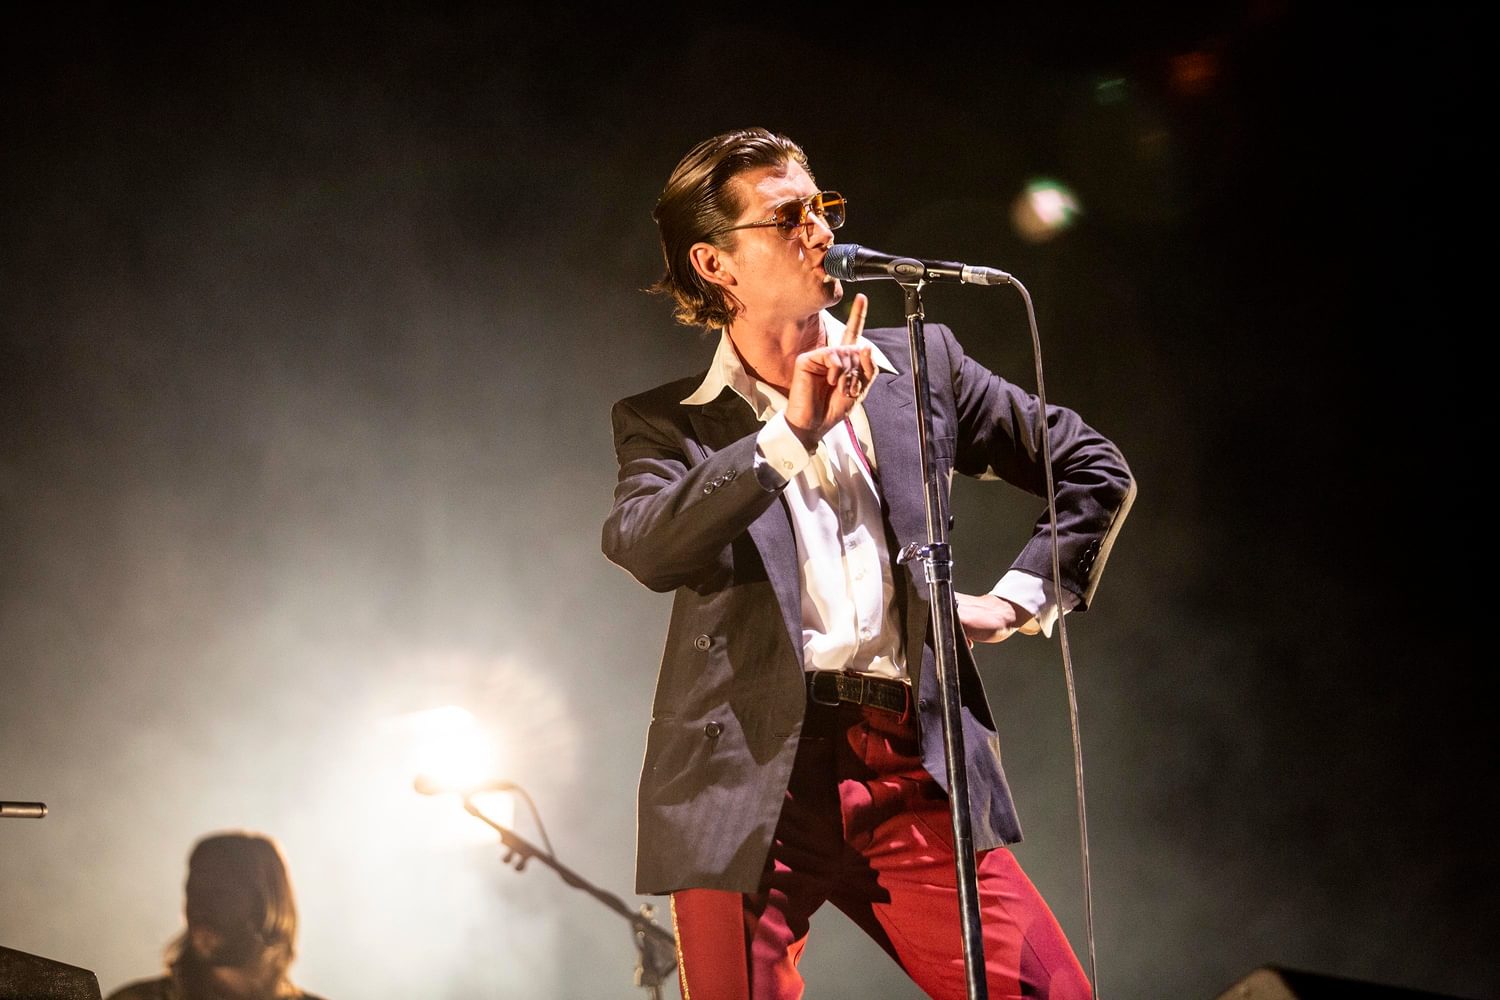 Arctic Monkeys bring 'Tranquility Base Hotel & Casino' to Mad Cool for a celebratory Day Two headline set